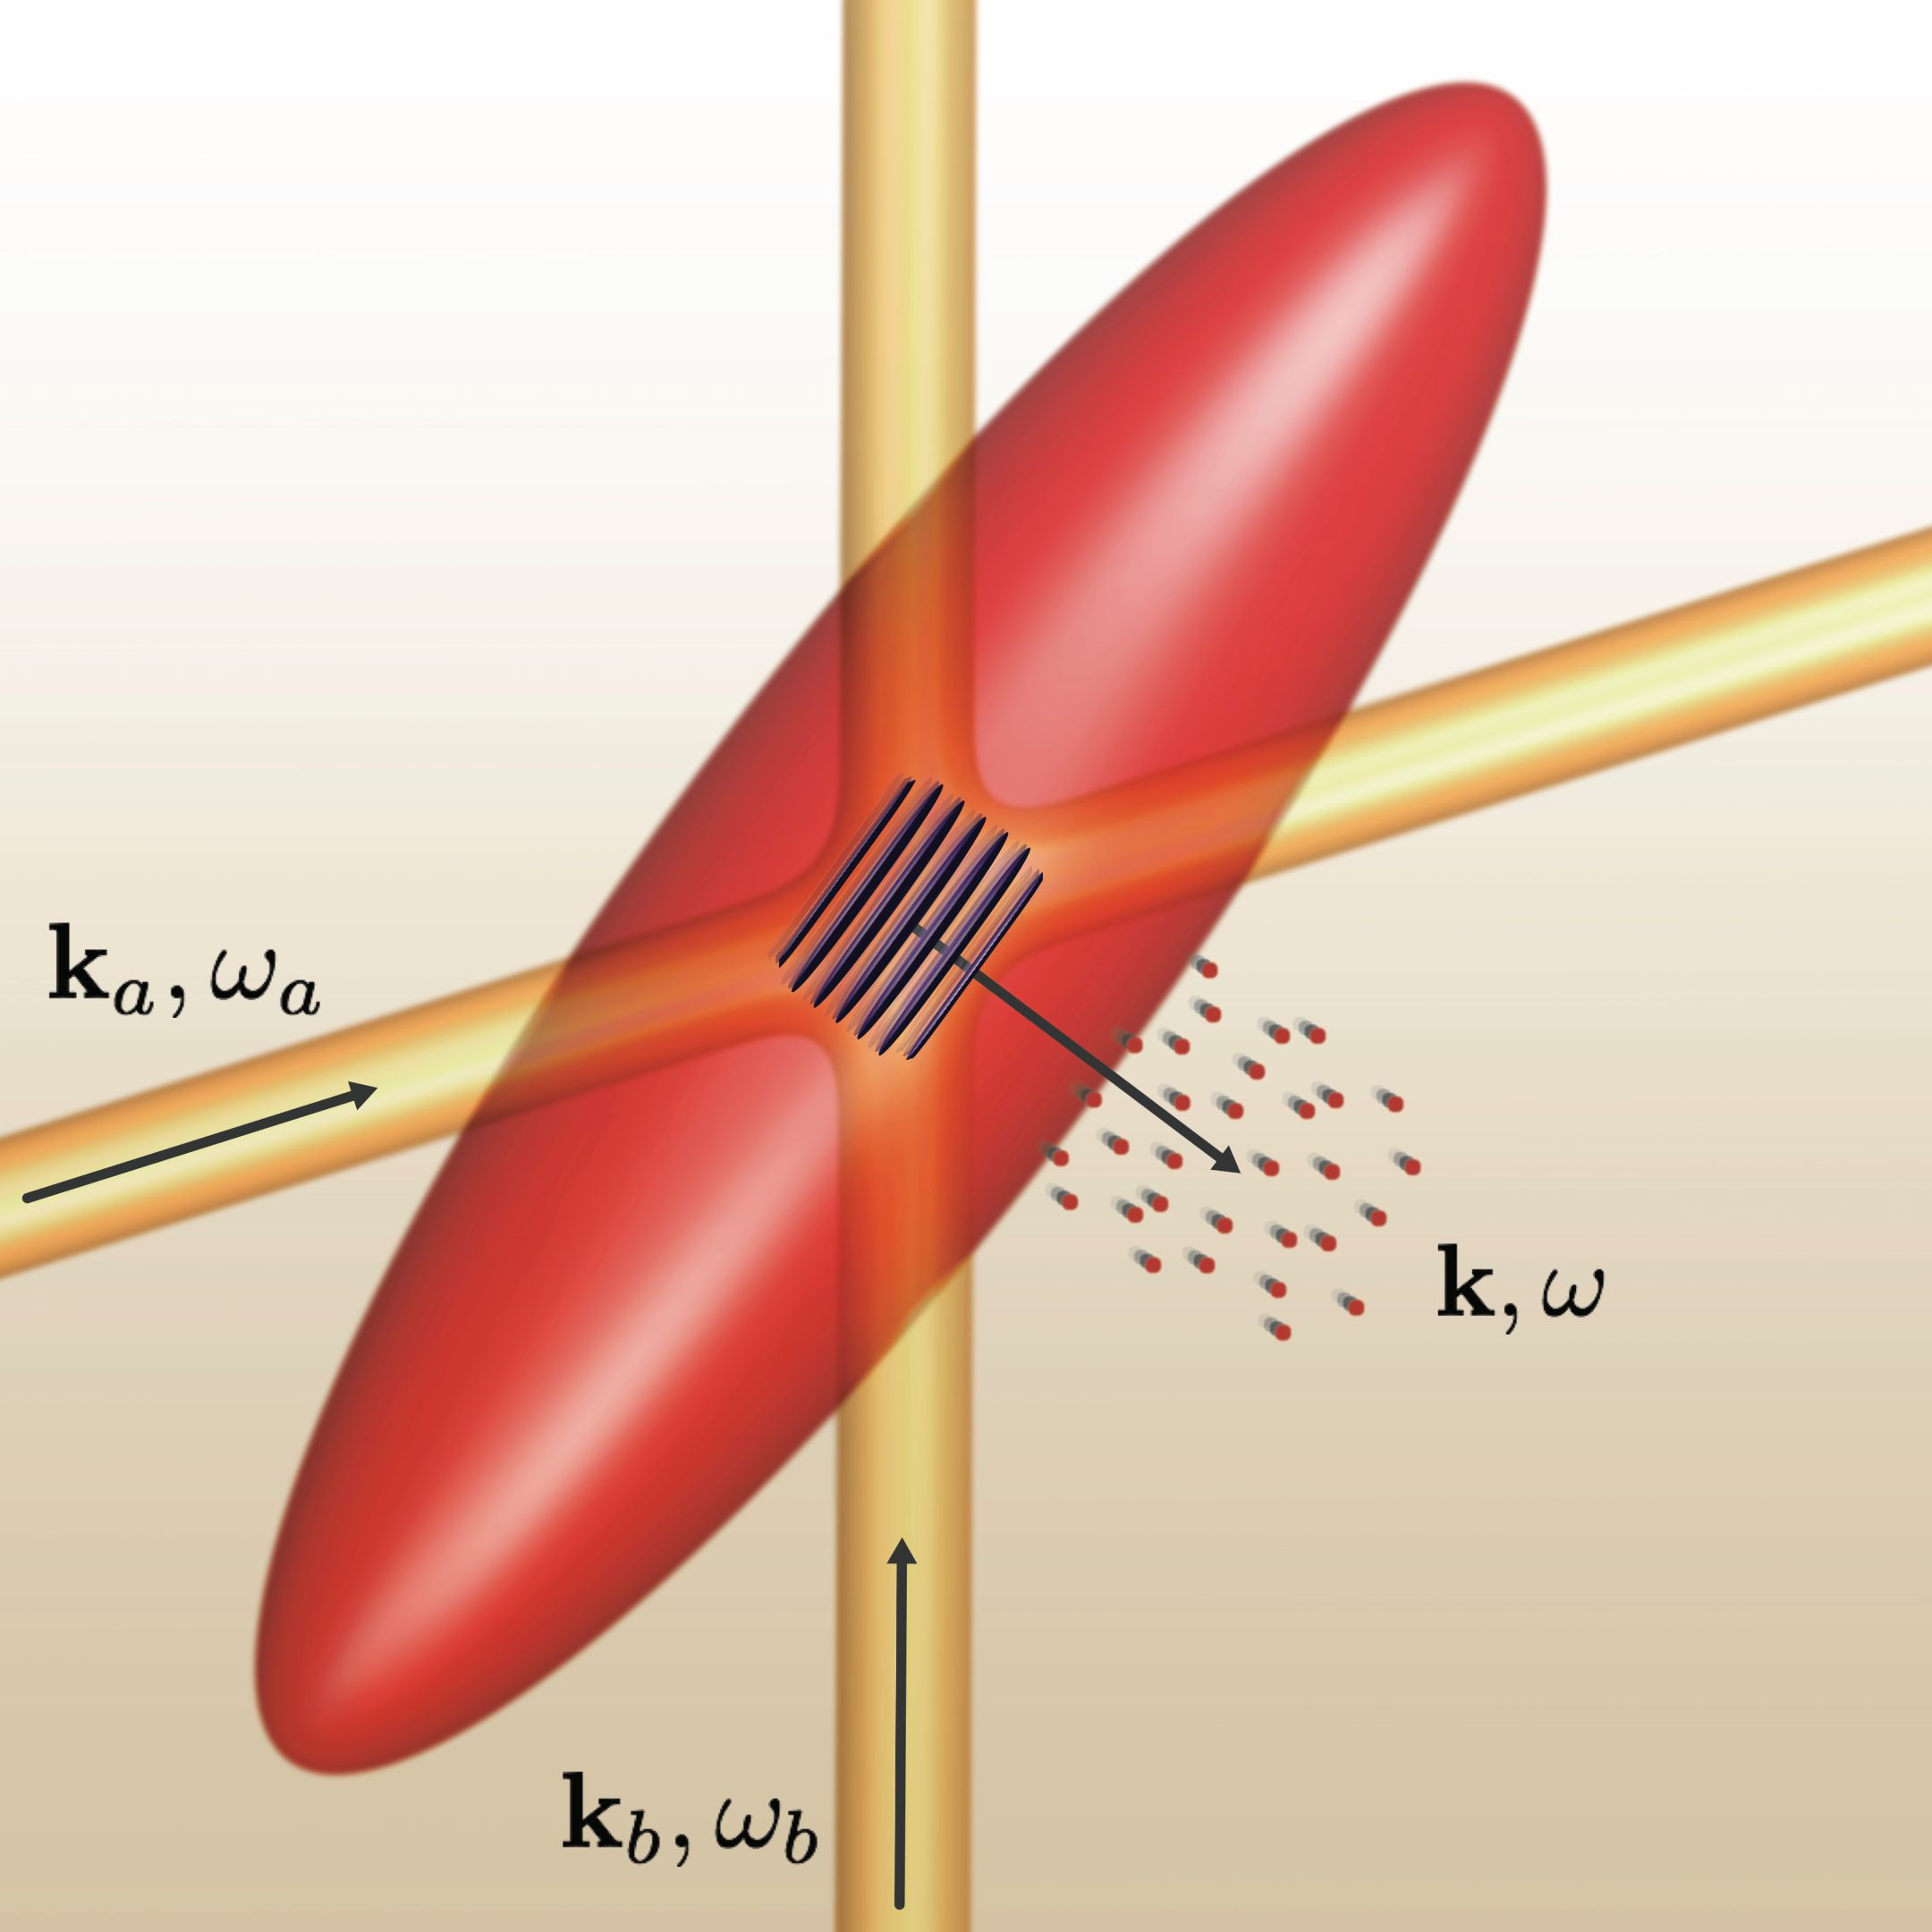 A scientific image of a red oval on top of 2 intersecting golden tubes, with various scientific symbols and markings labelled on the diagram. 